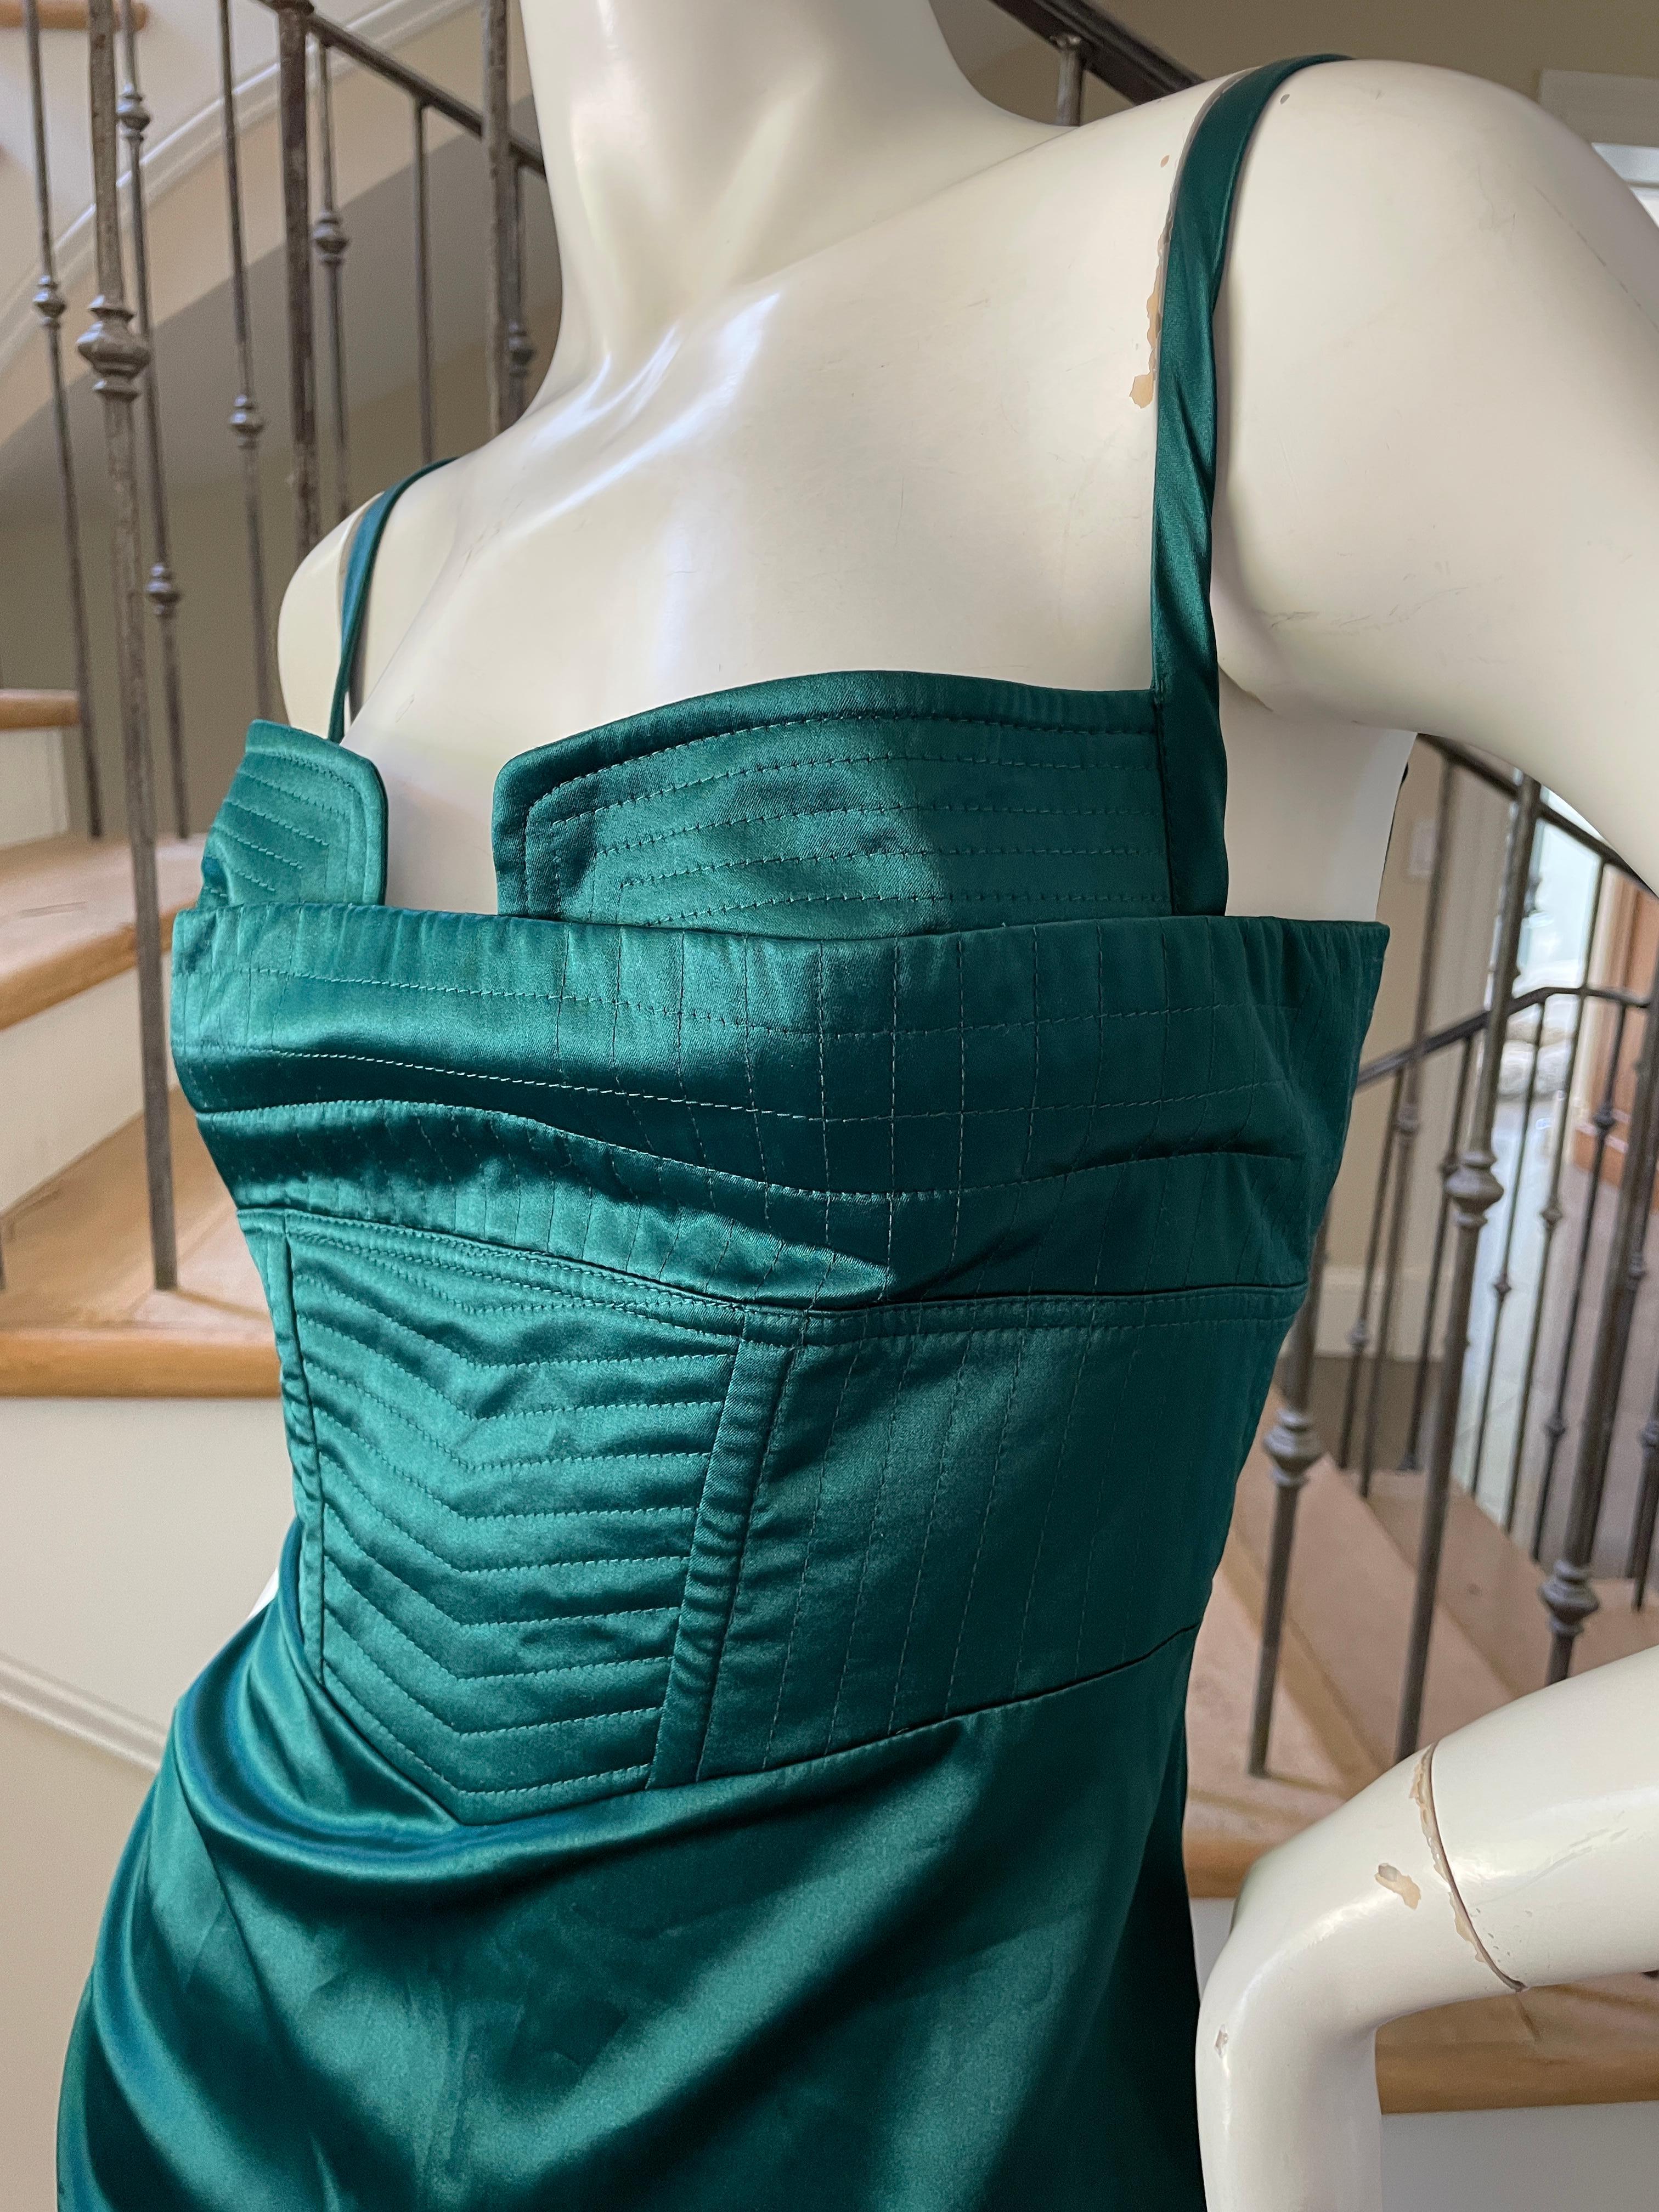 Women's or Men's Just Cavalli Emerald Green Cocktail Dress by Roberto Cavalli For Sale